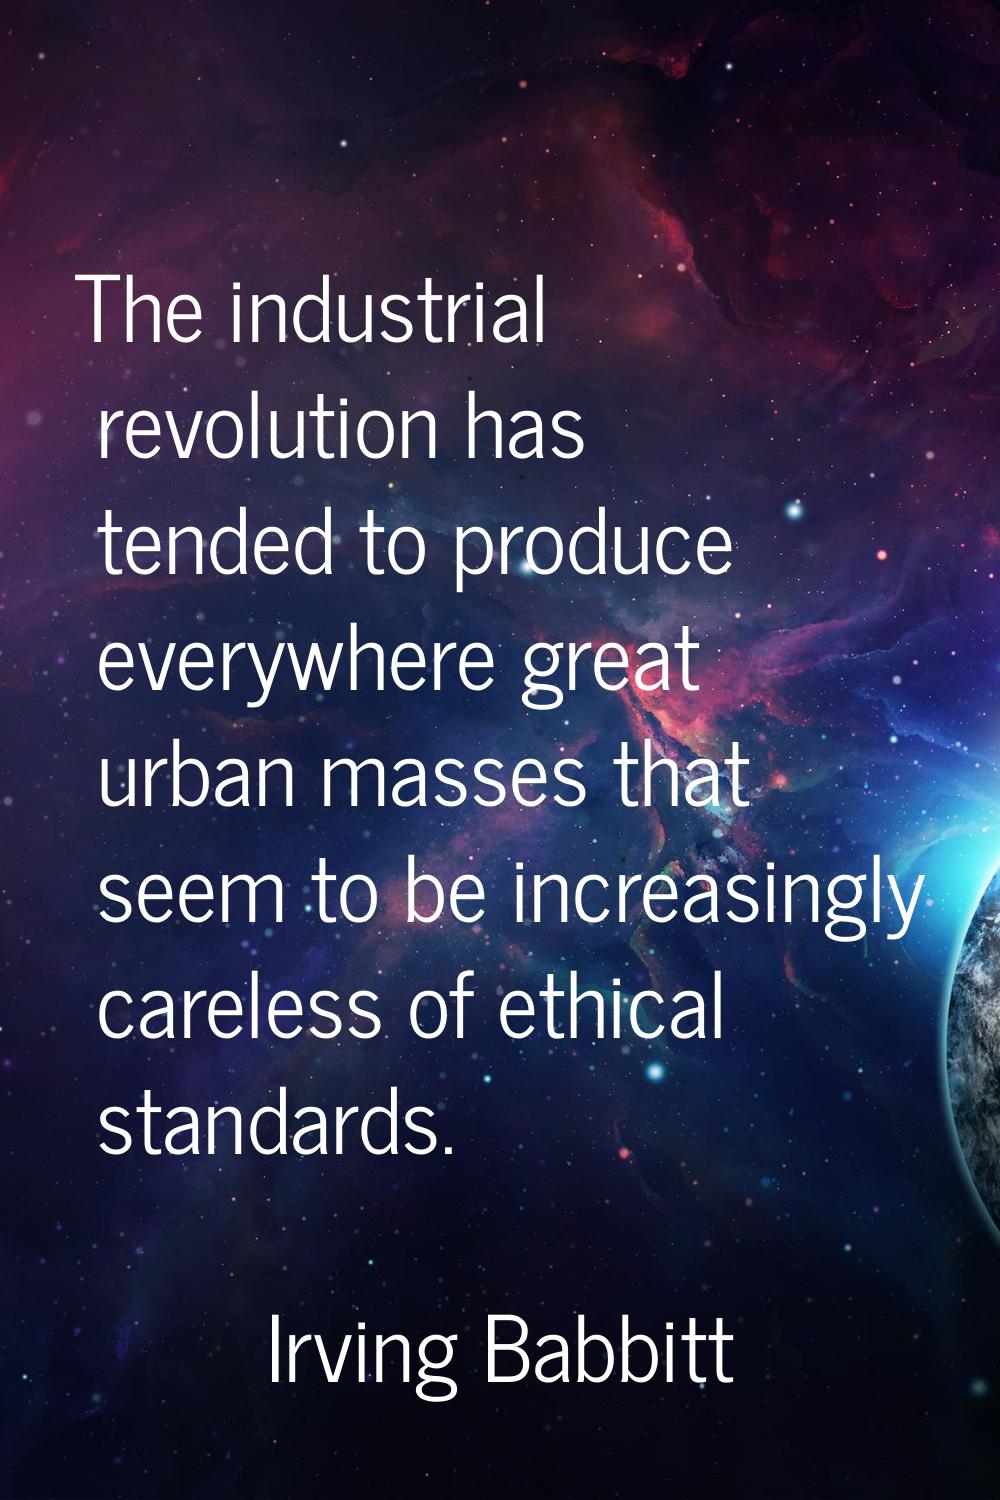 The industrial revolution has tended to produce everywhere great urban masses that seem to be incre